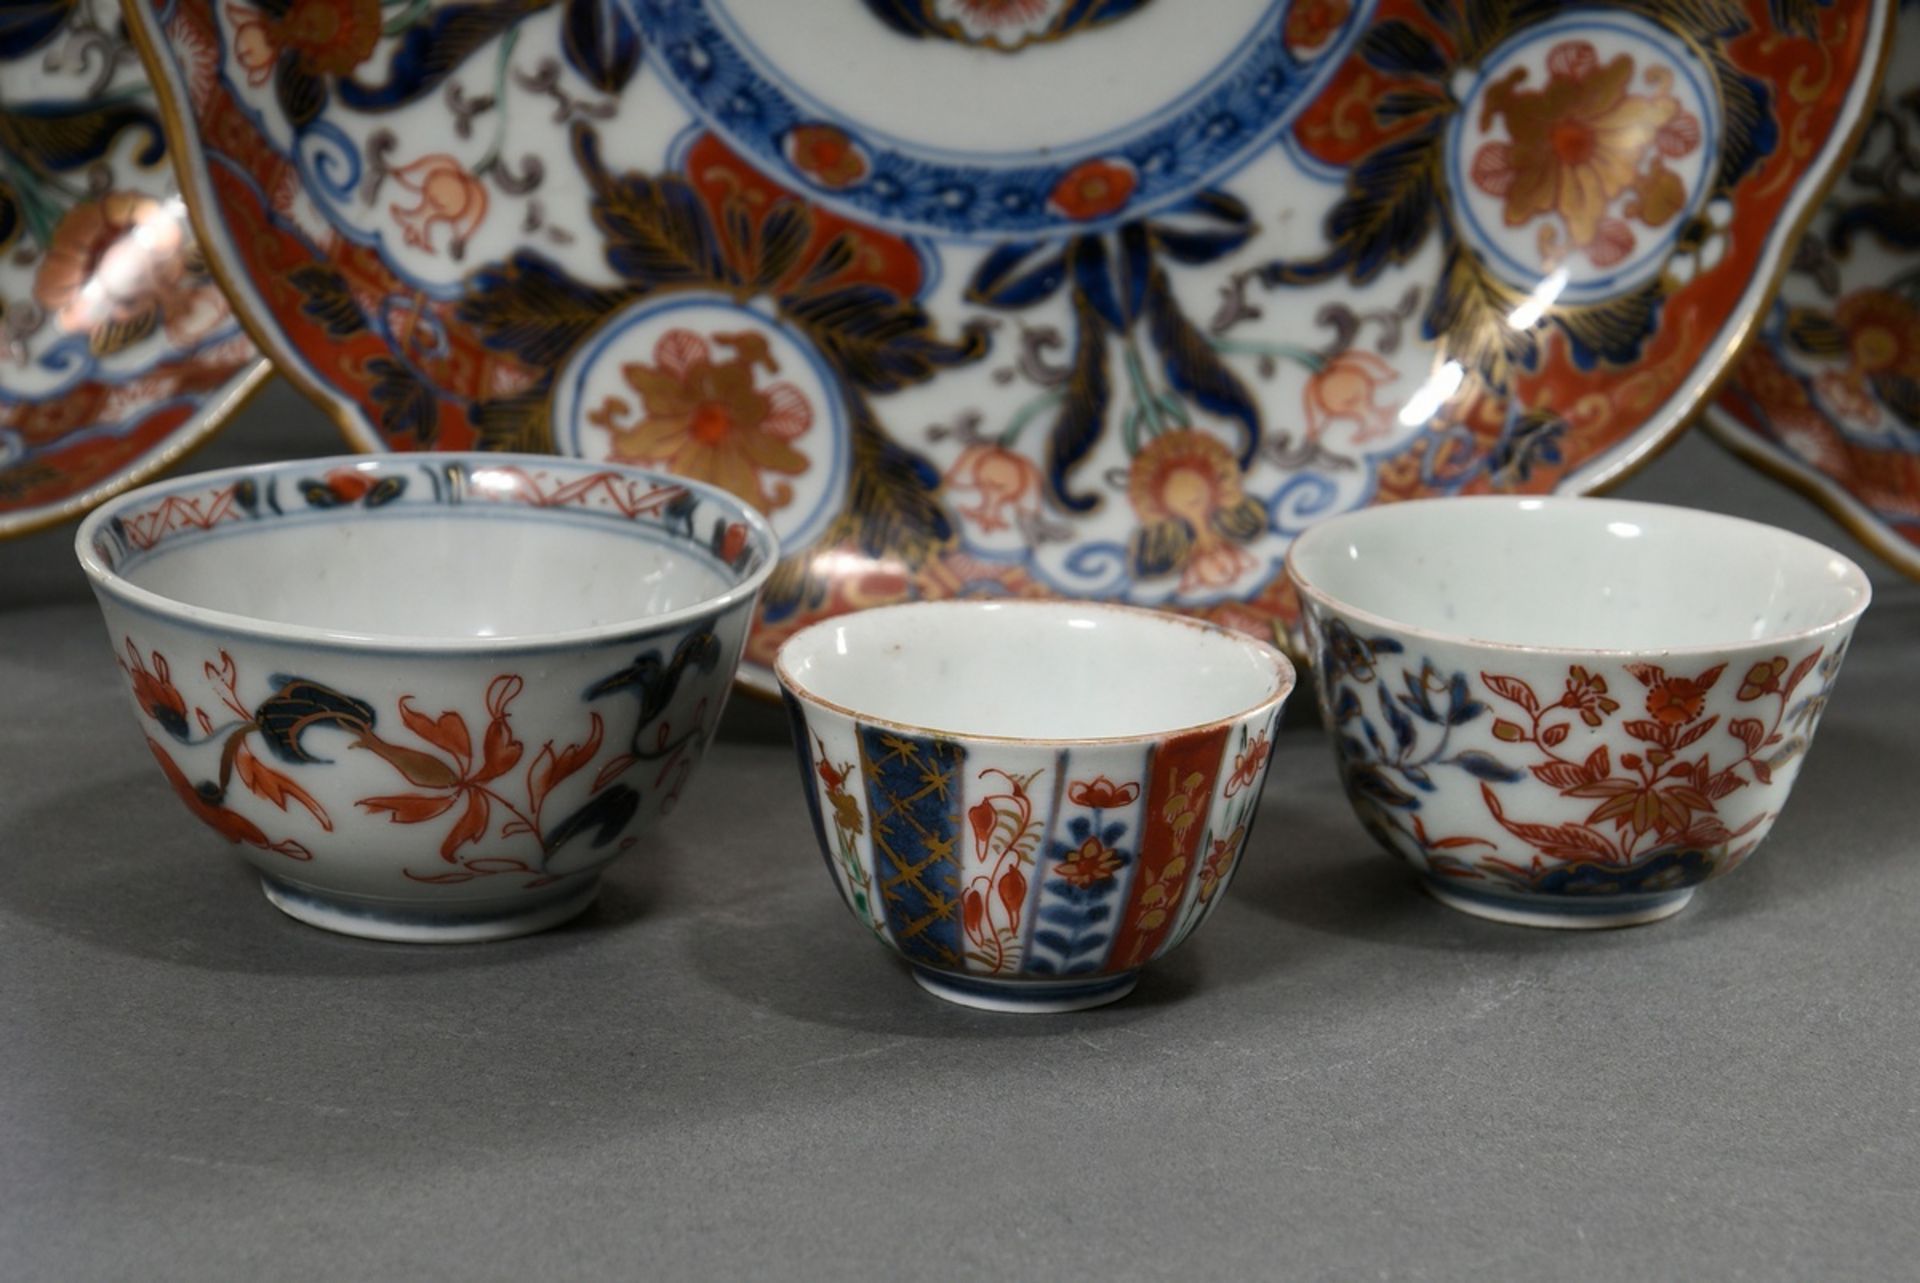 7 Various Japanese porcelains with Imari décor in underglaze blue, iron red and gold: 3 various sak - Image 2 of 8